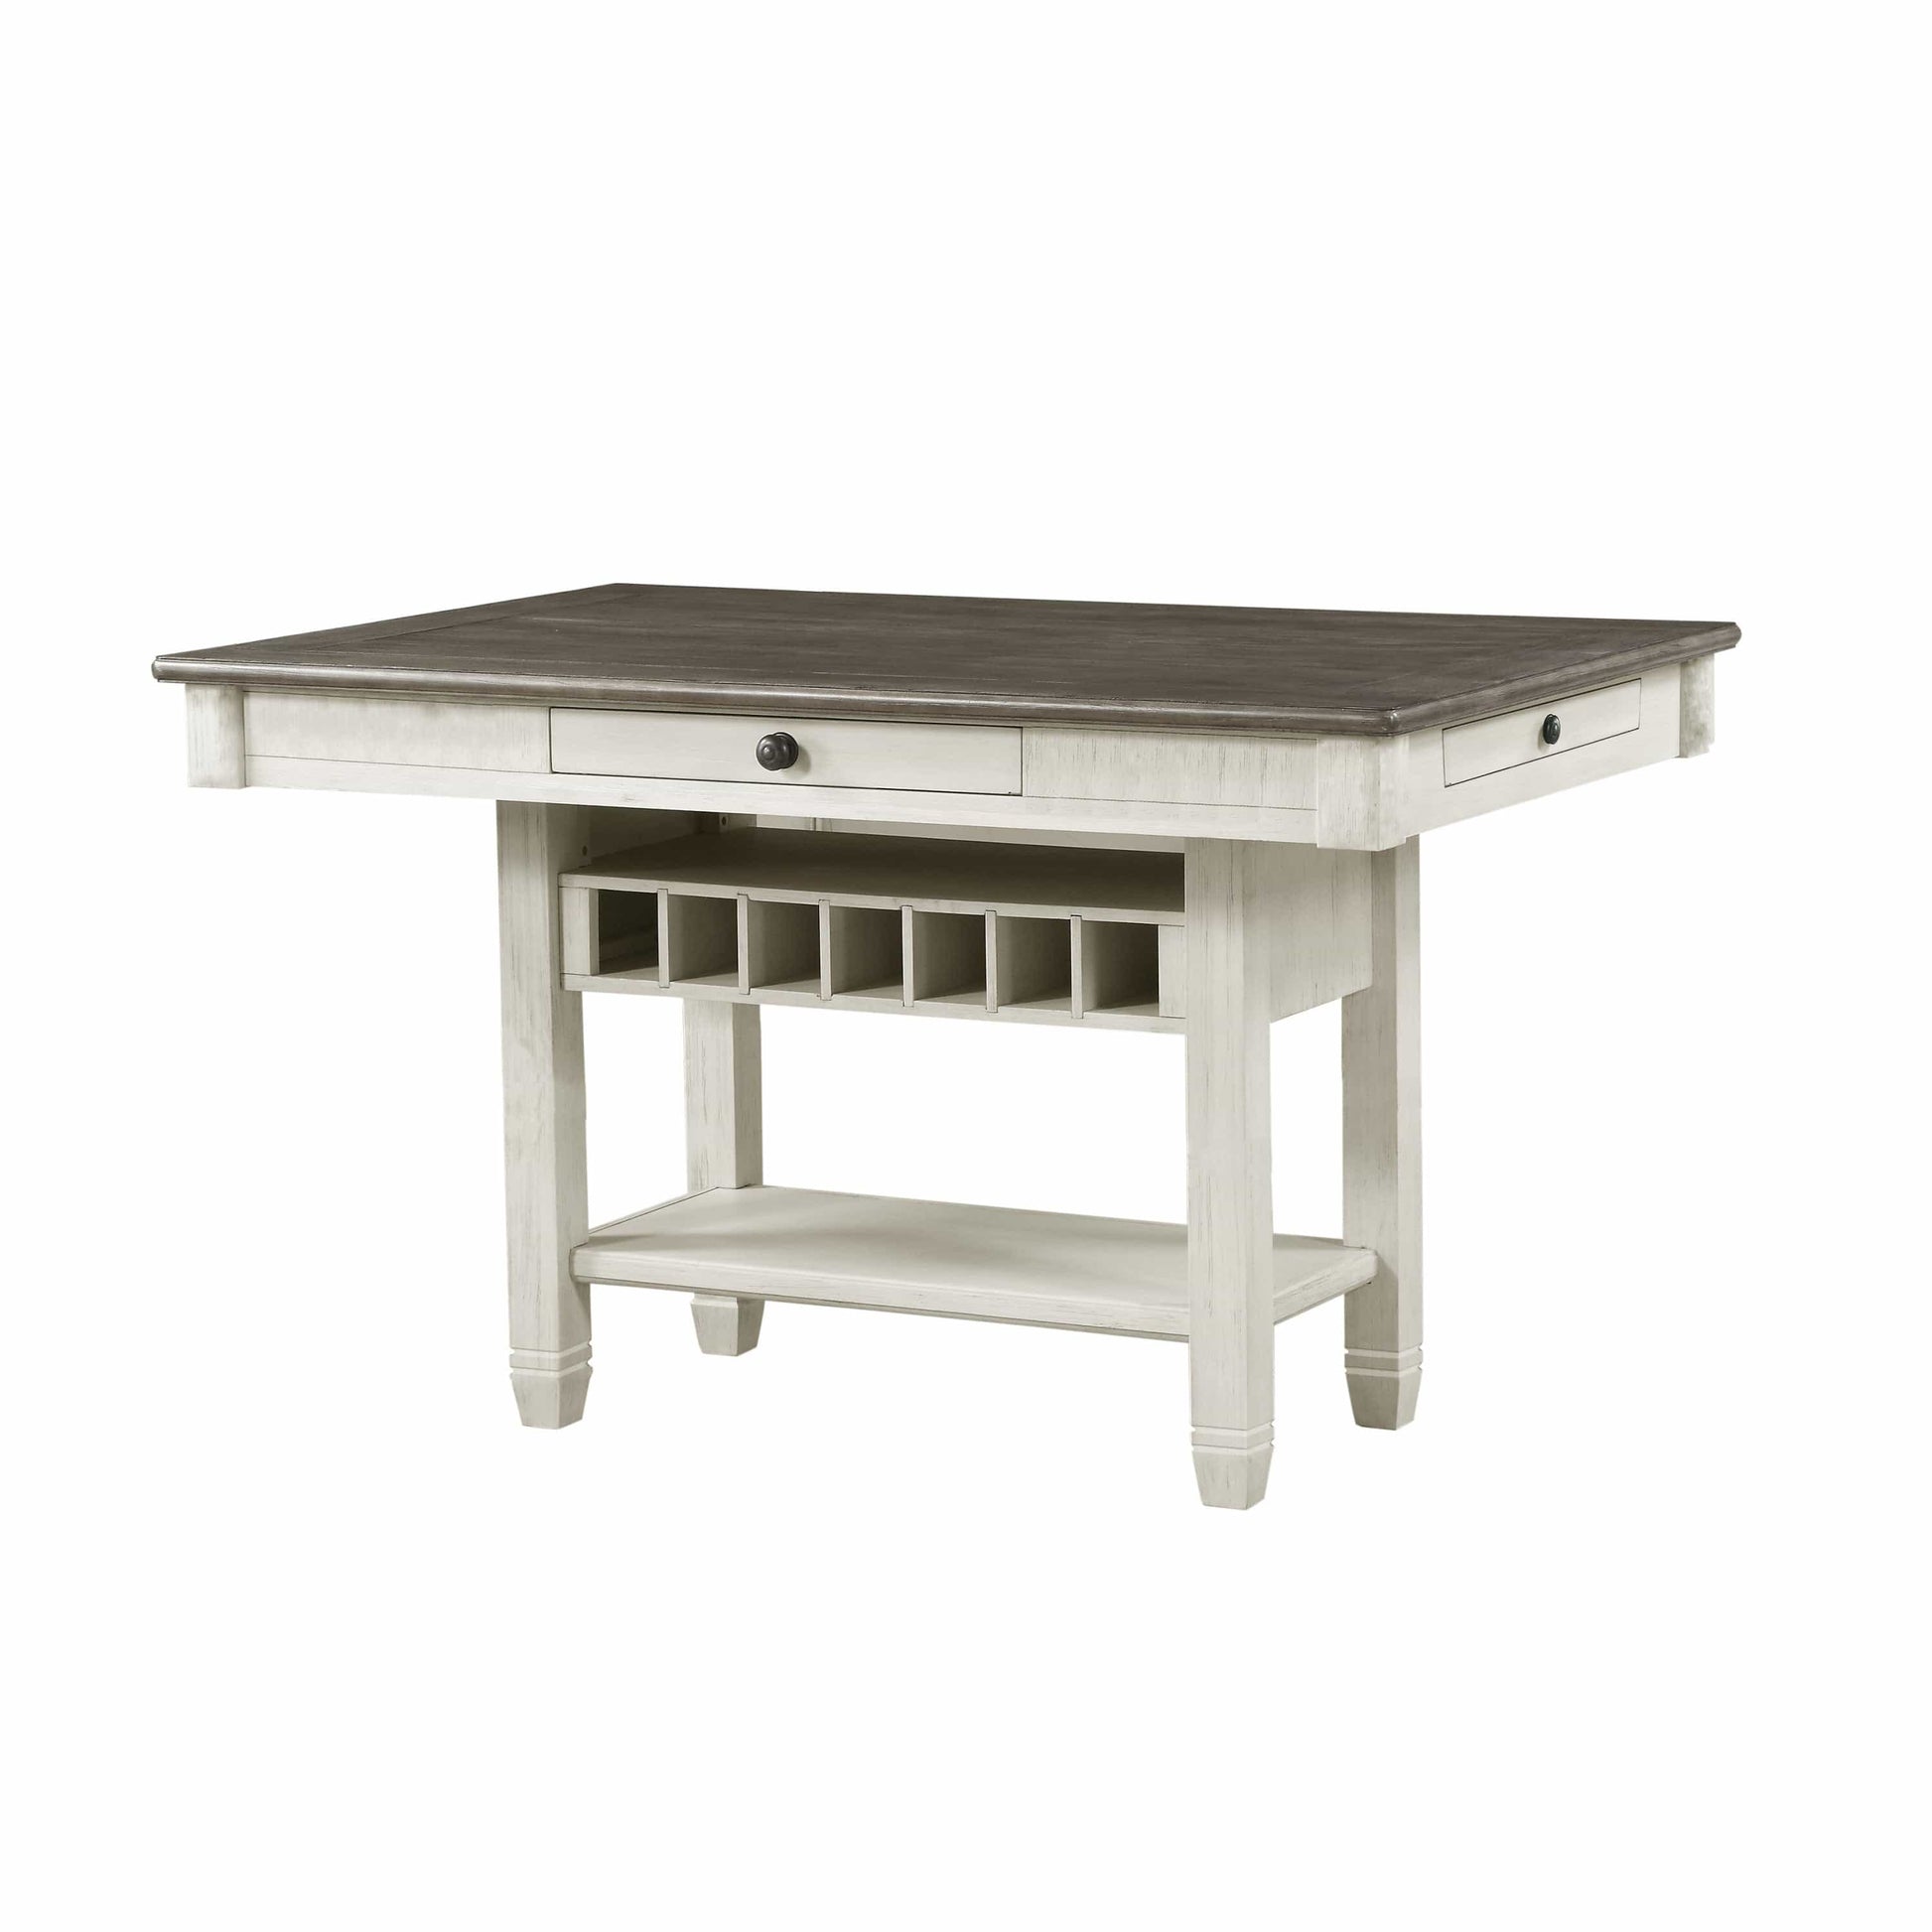 1st Choice Furniture Direct Counter Height Table 1st Choice Counter Height Table with Drawers in White & Rosy Brown